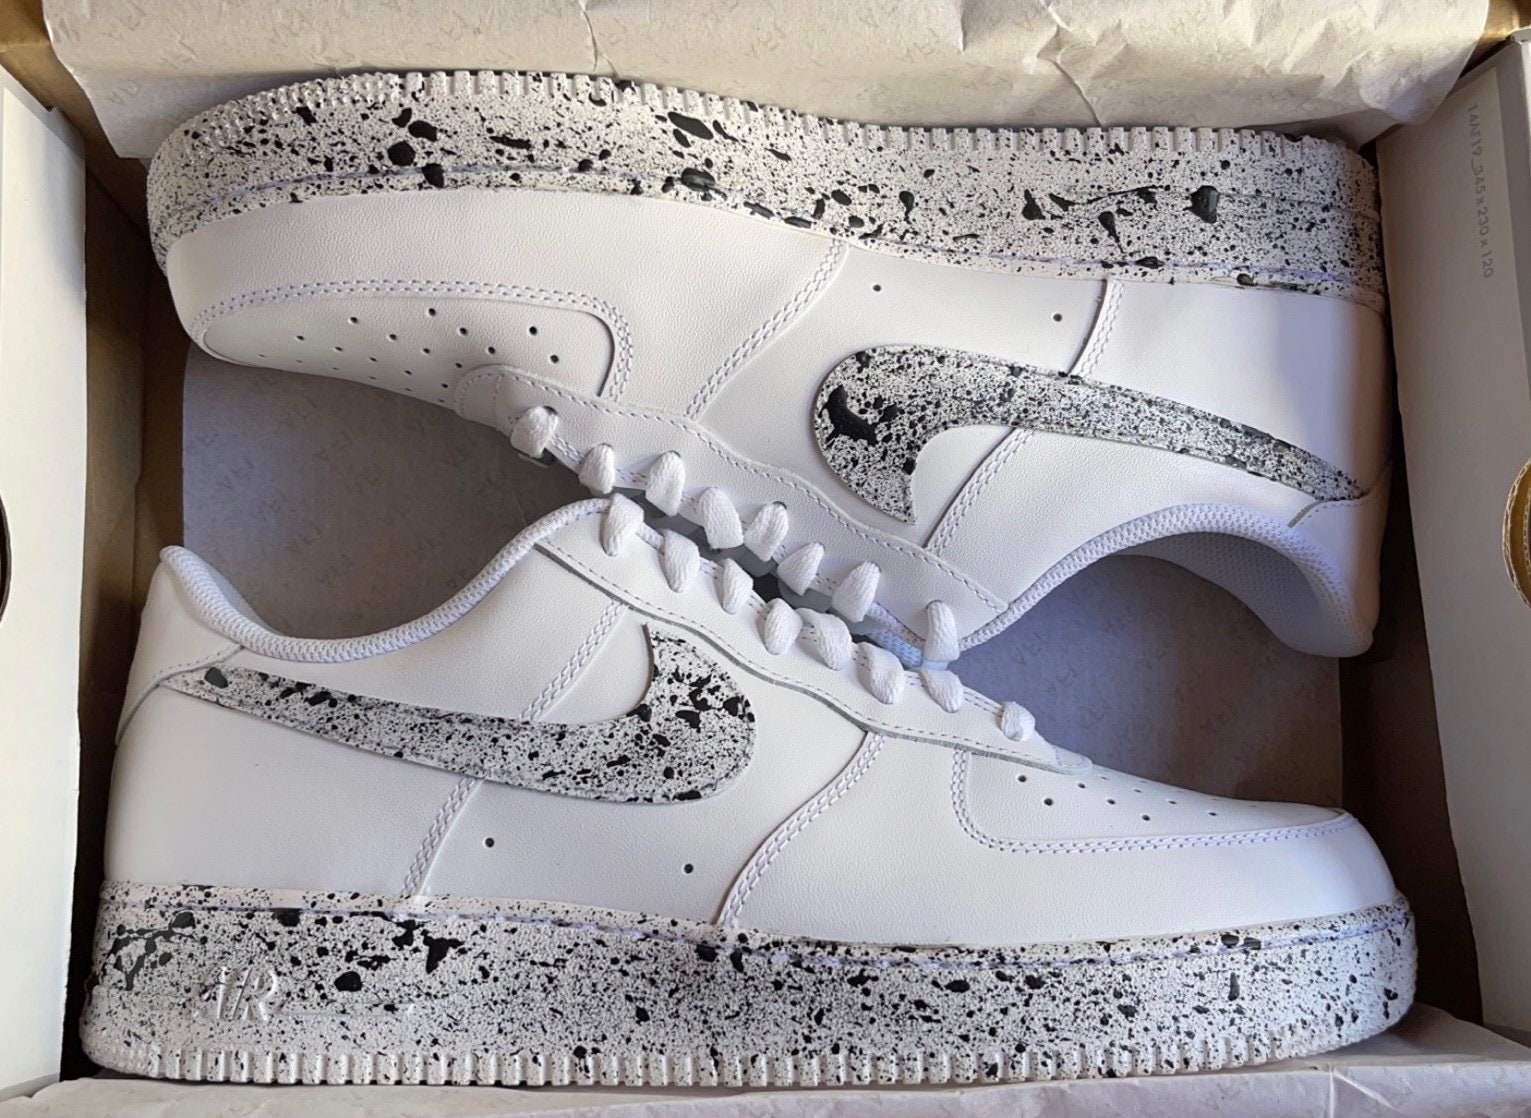 Buy Airforce 1 Louis Vuitton Online In India -  India